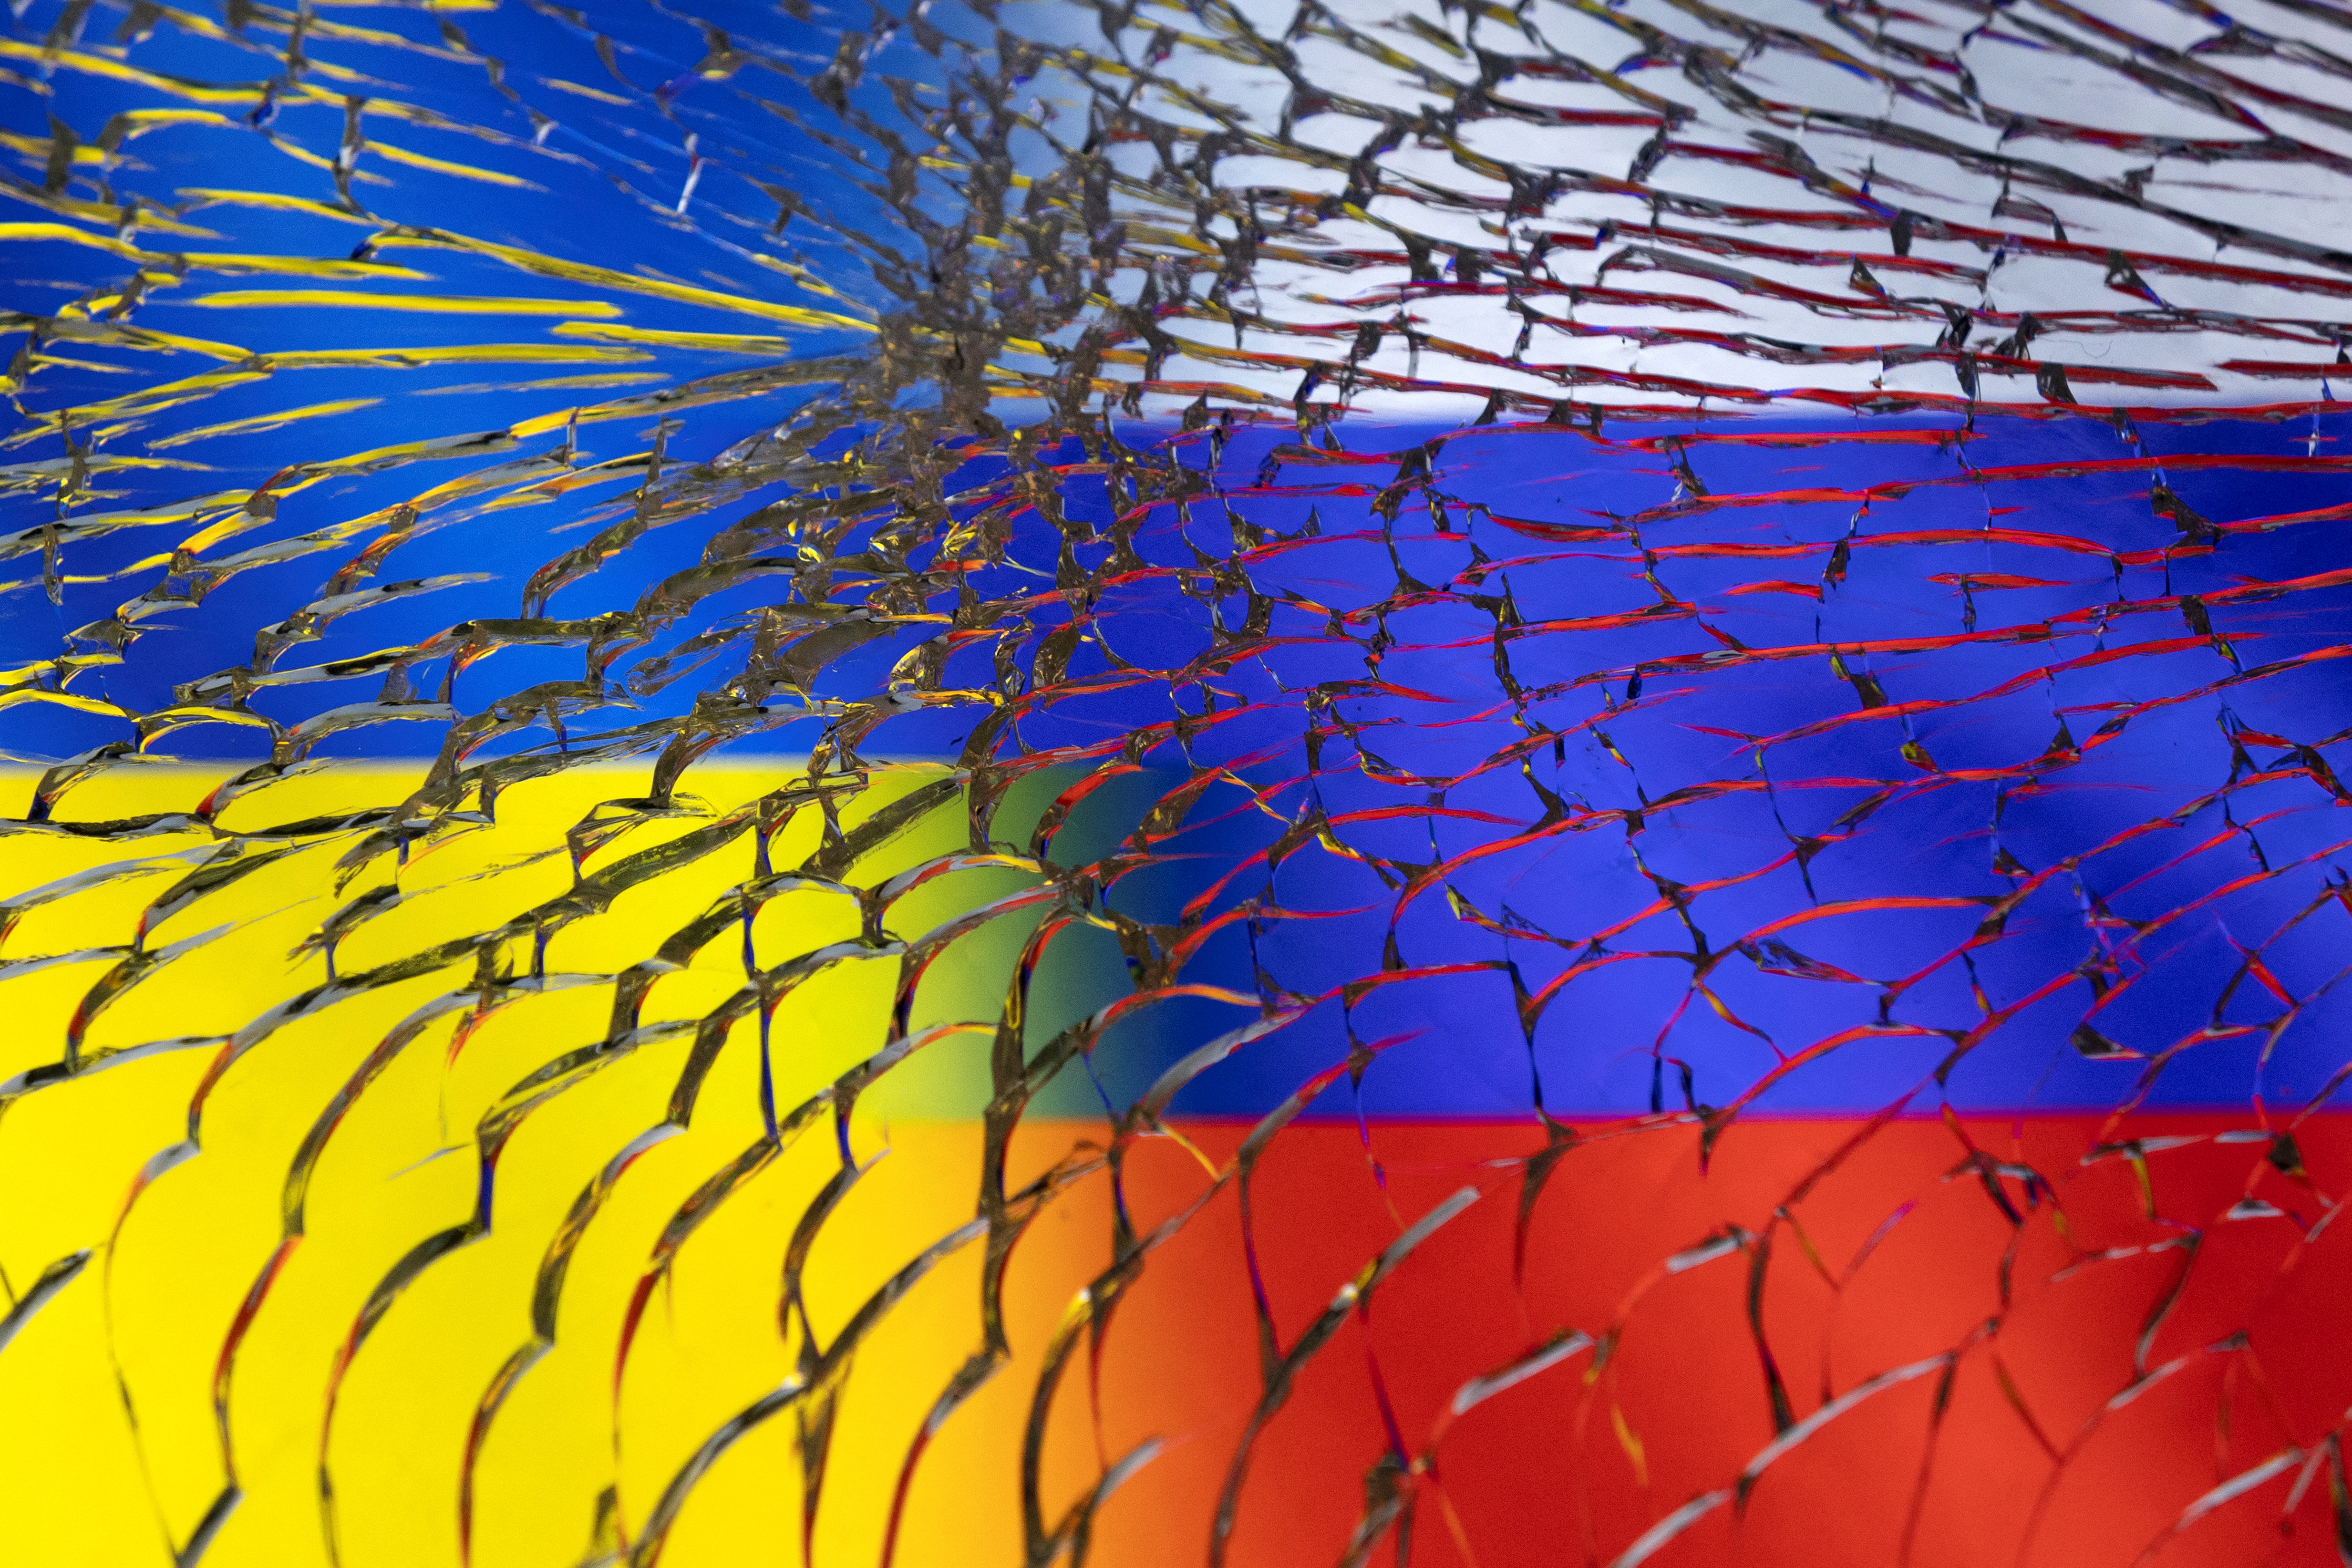 Illustration shows Ukraine and Russian flags through broken glass